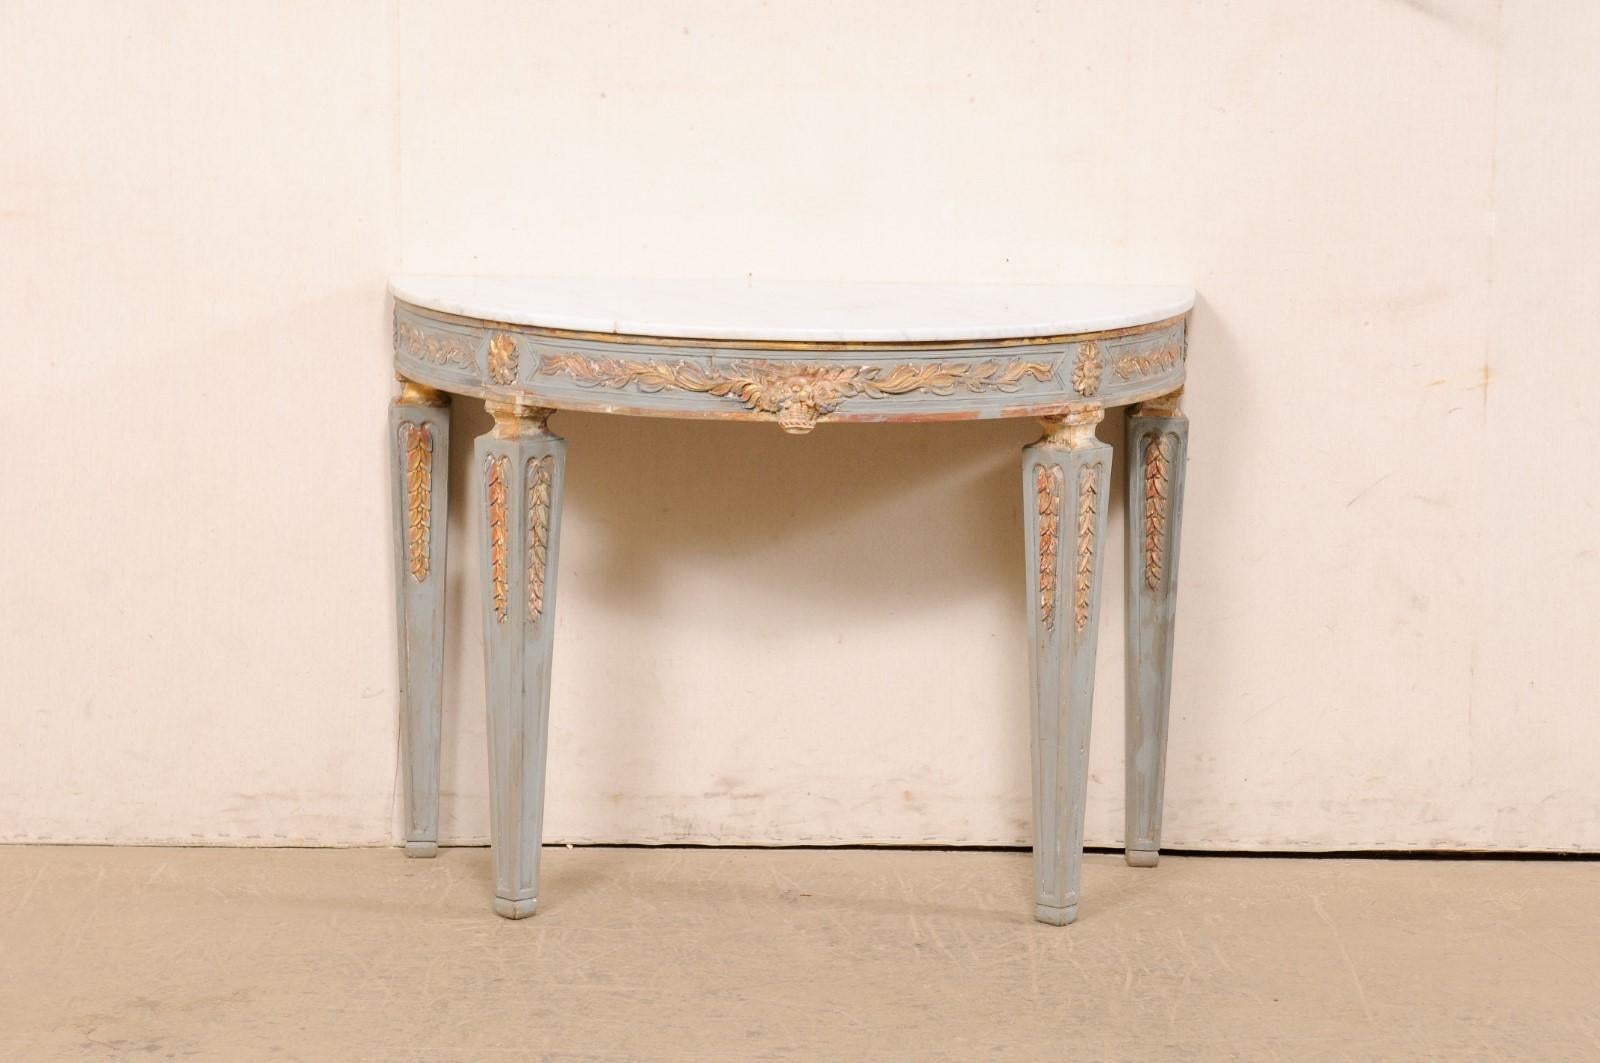 An Italian painted wood demi-lune table with marble top. This vintage table from Italy features a half-moon shaped marble top which rests atop an apron decorated with a bouquet basket of flowers at front center, flanked within a rhythmic display of